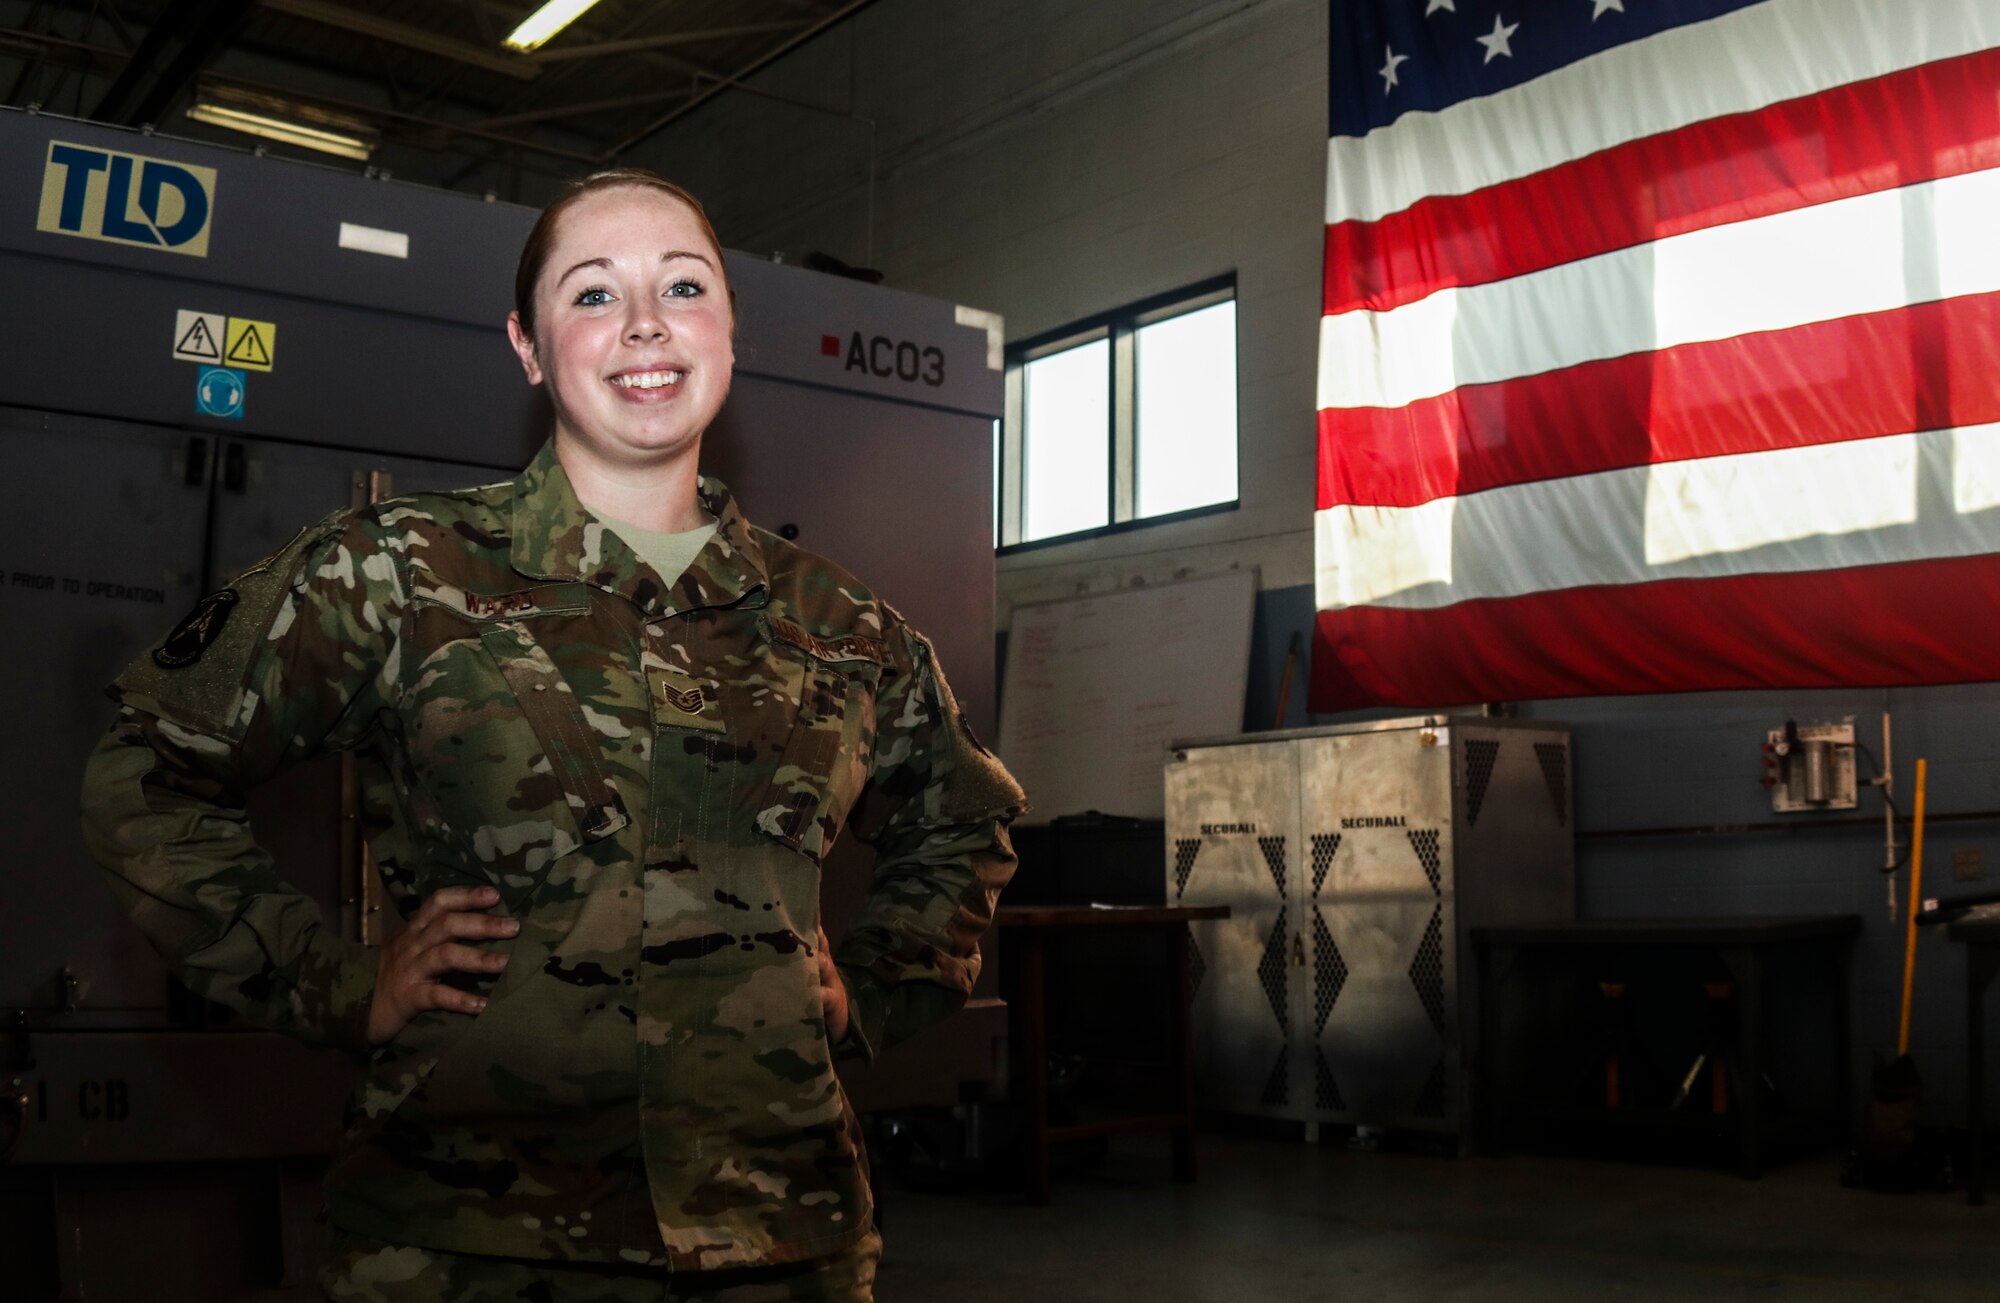 Dyess Airman attends AFWERX innovation event, receives $125,000 for project